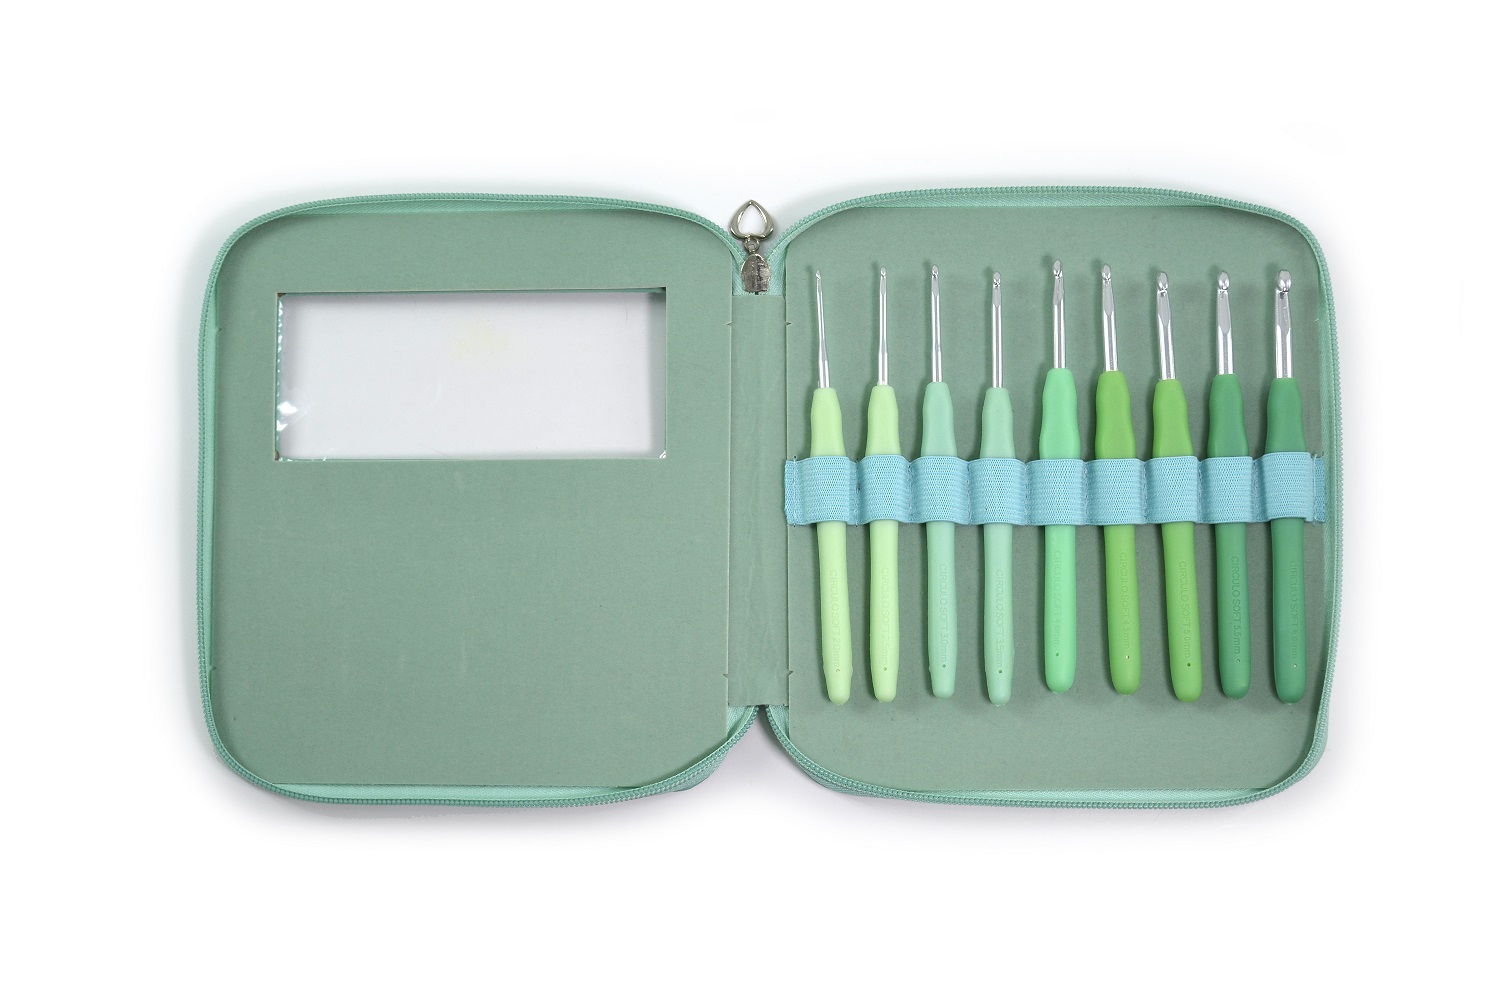 Circulo Silicone Handle Crochet Hook Set with Green Case